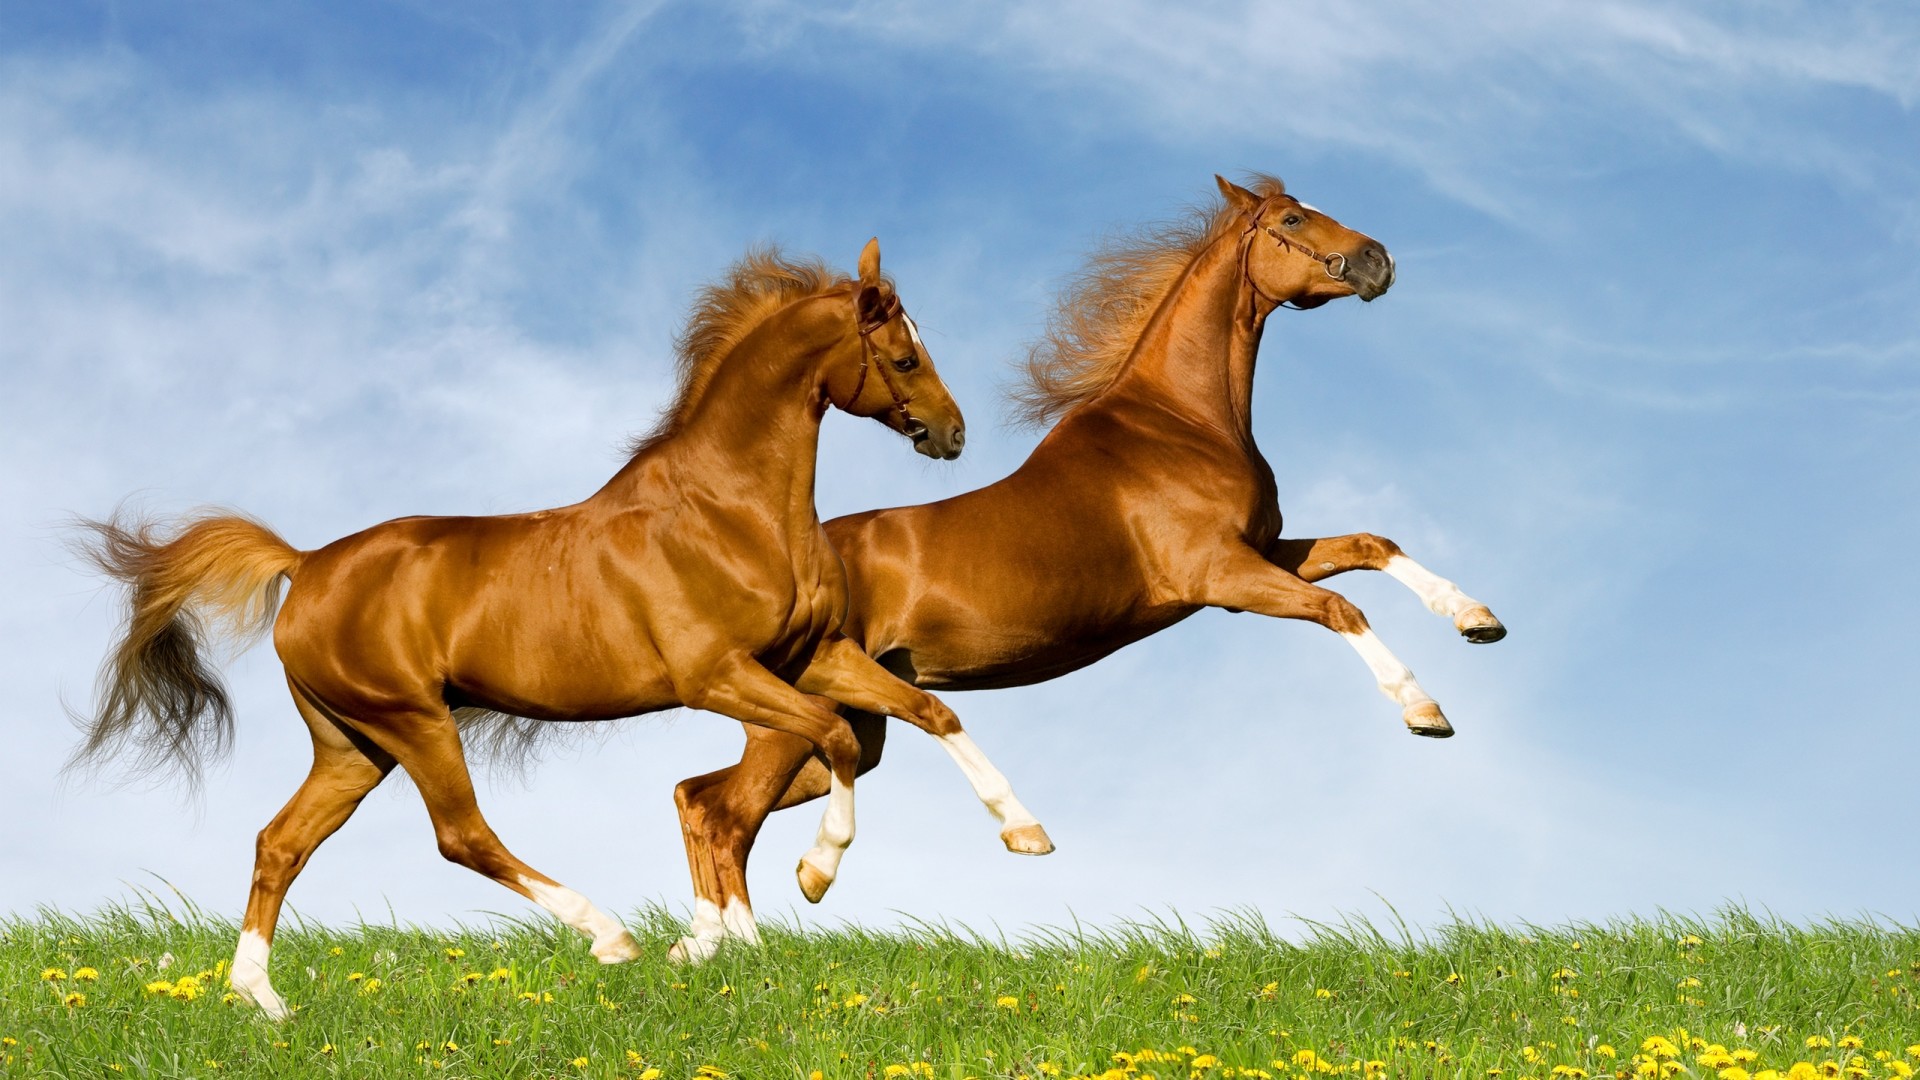 1920x1080 Backgrounds for Gt Wild Horses Running Wallpaper px